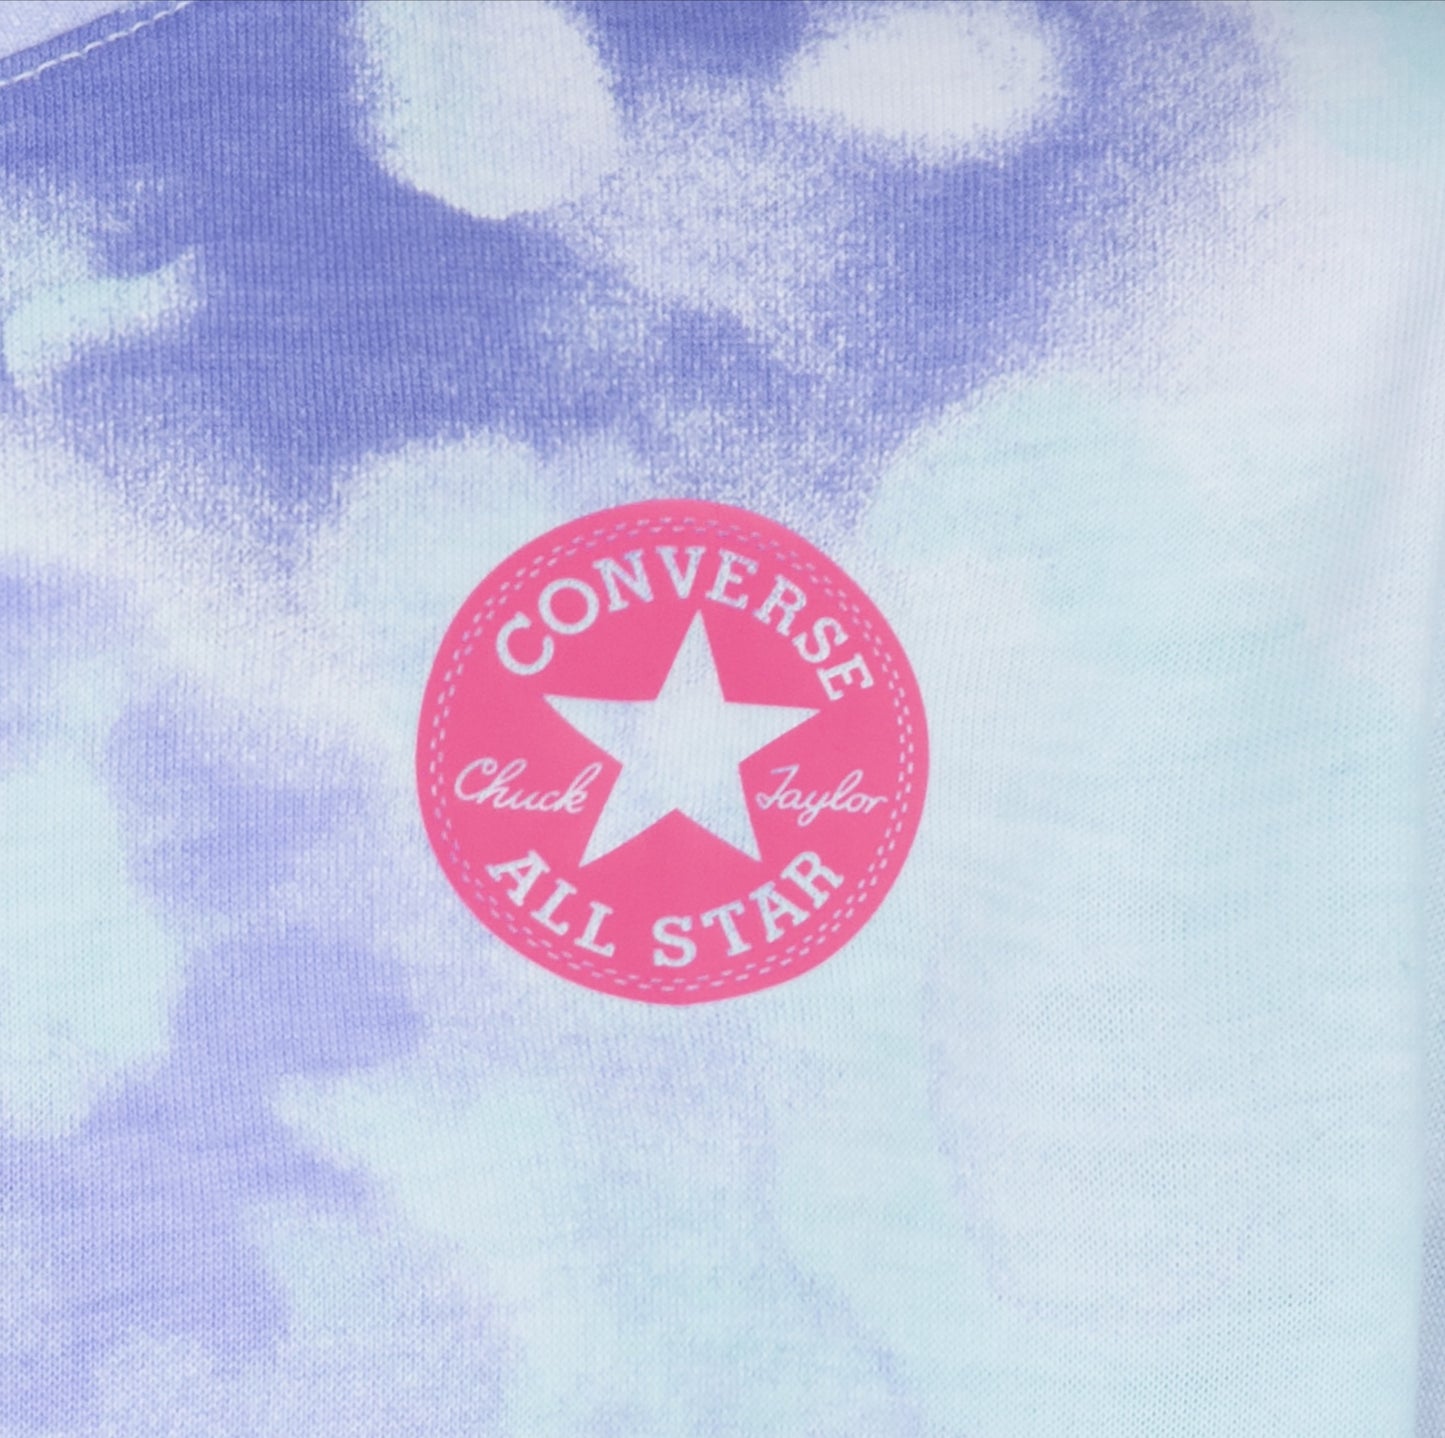 Converse Floral Printed Boxy Tee-W24